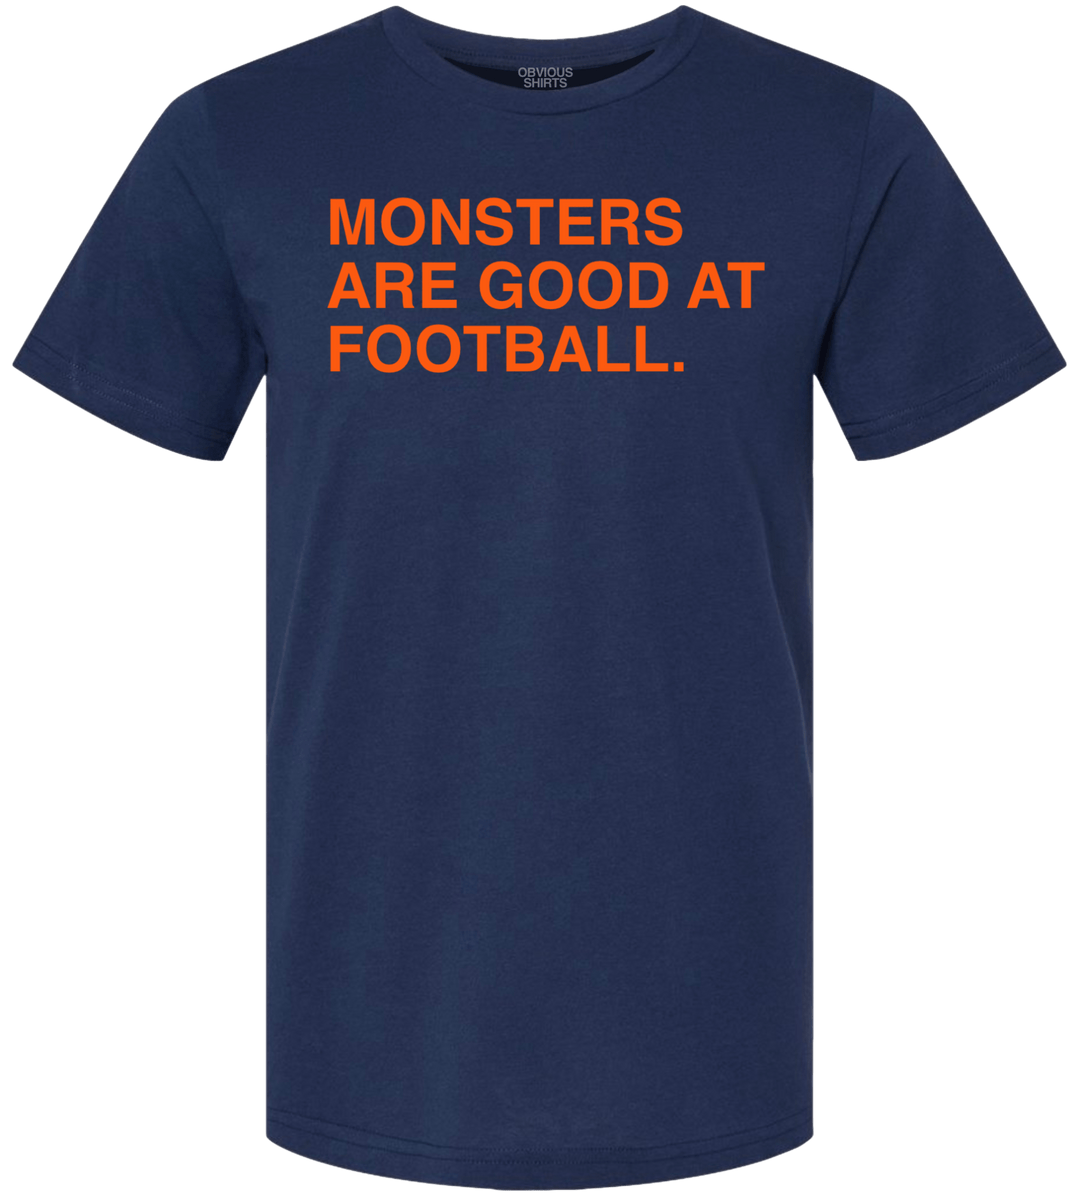 MONSTERS ARE GOOD AT FOOTBALL. - OBVIOUS SHIRTS